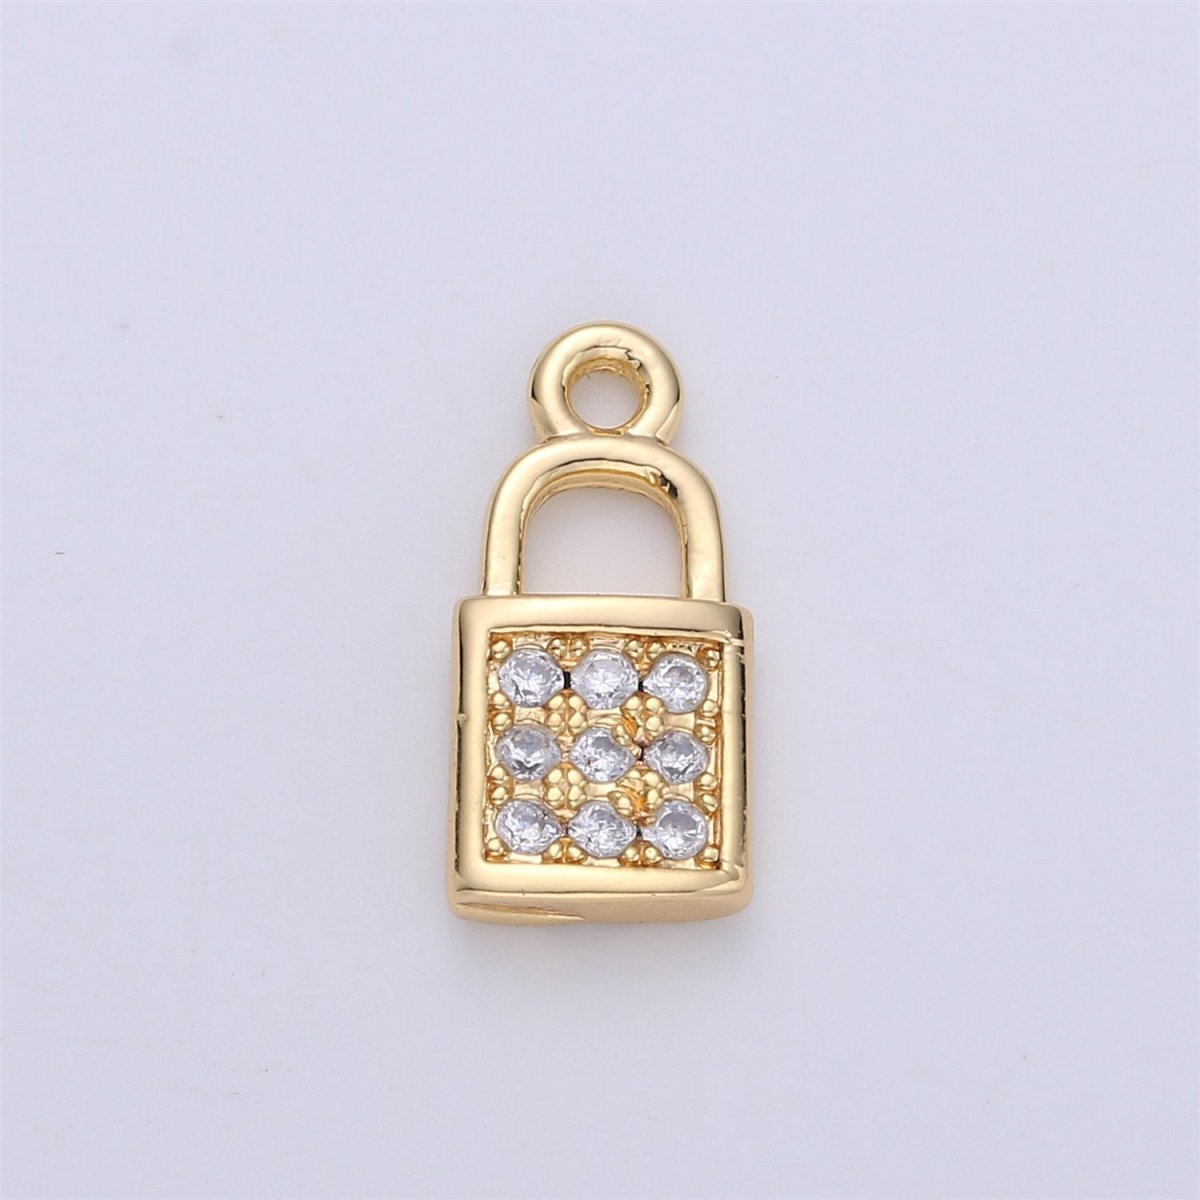 Tiny Gold Micro Pave padlock charm for Jewelry making, Minimalist, Simple lock charm for Bracelet Necklace Earring Component C-686 - DLUXCA